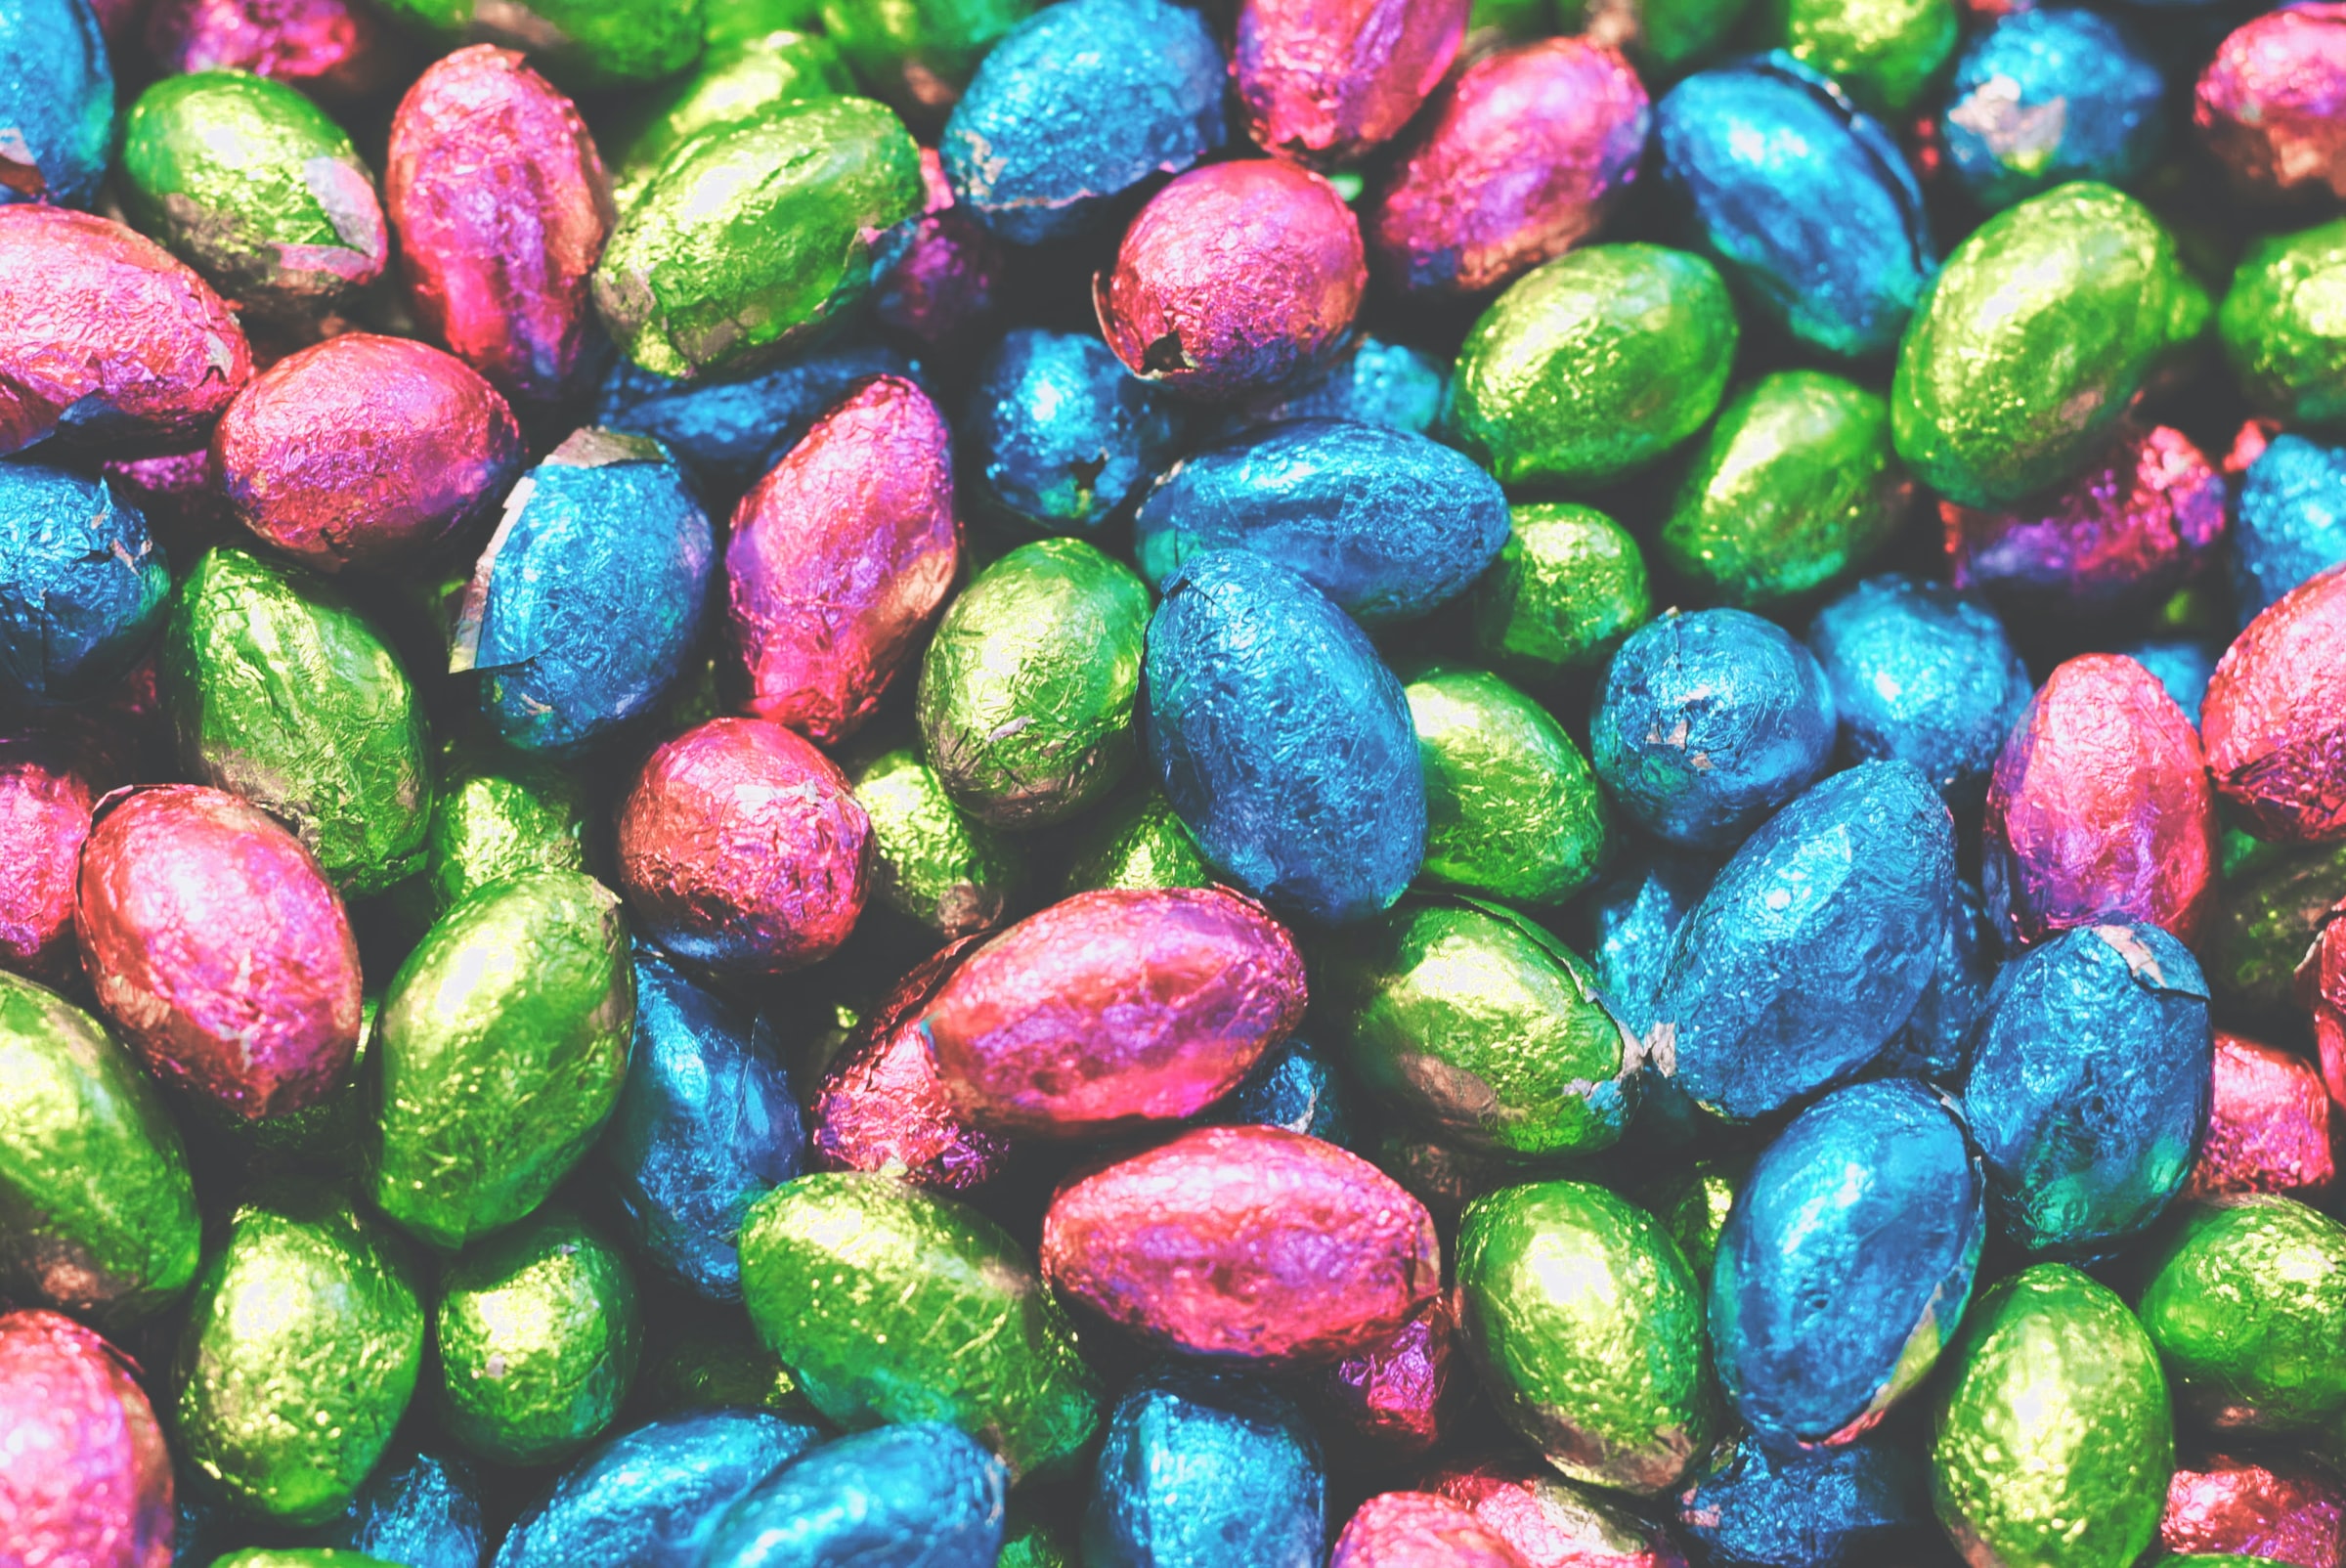 Image shows easter chocolate